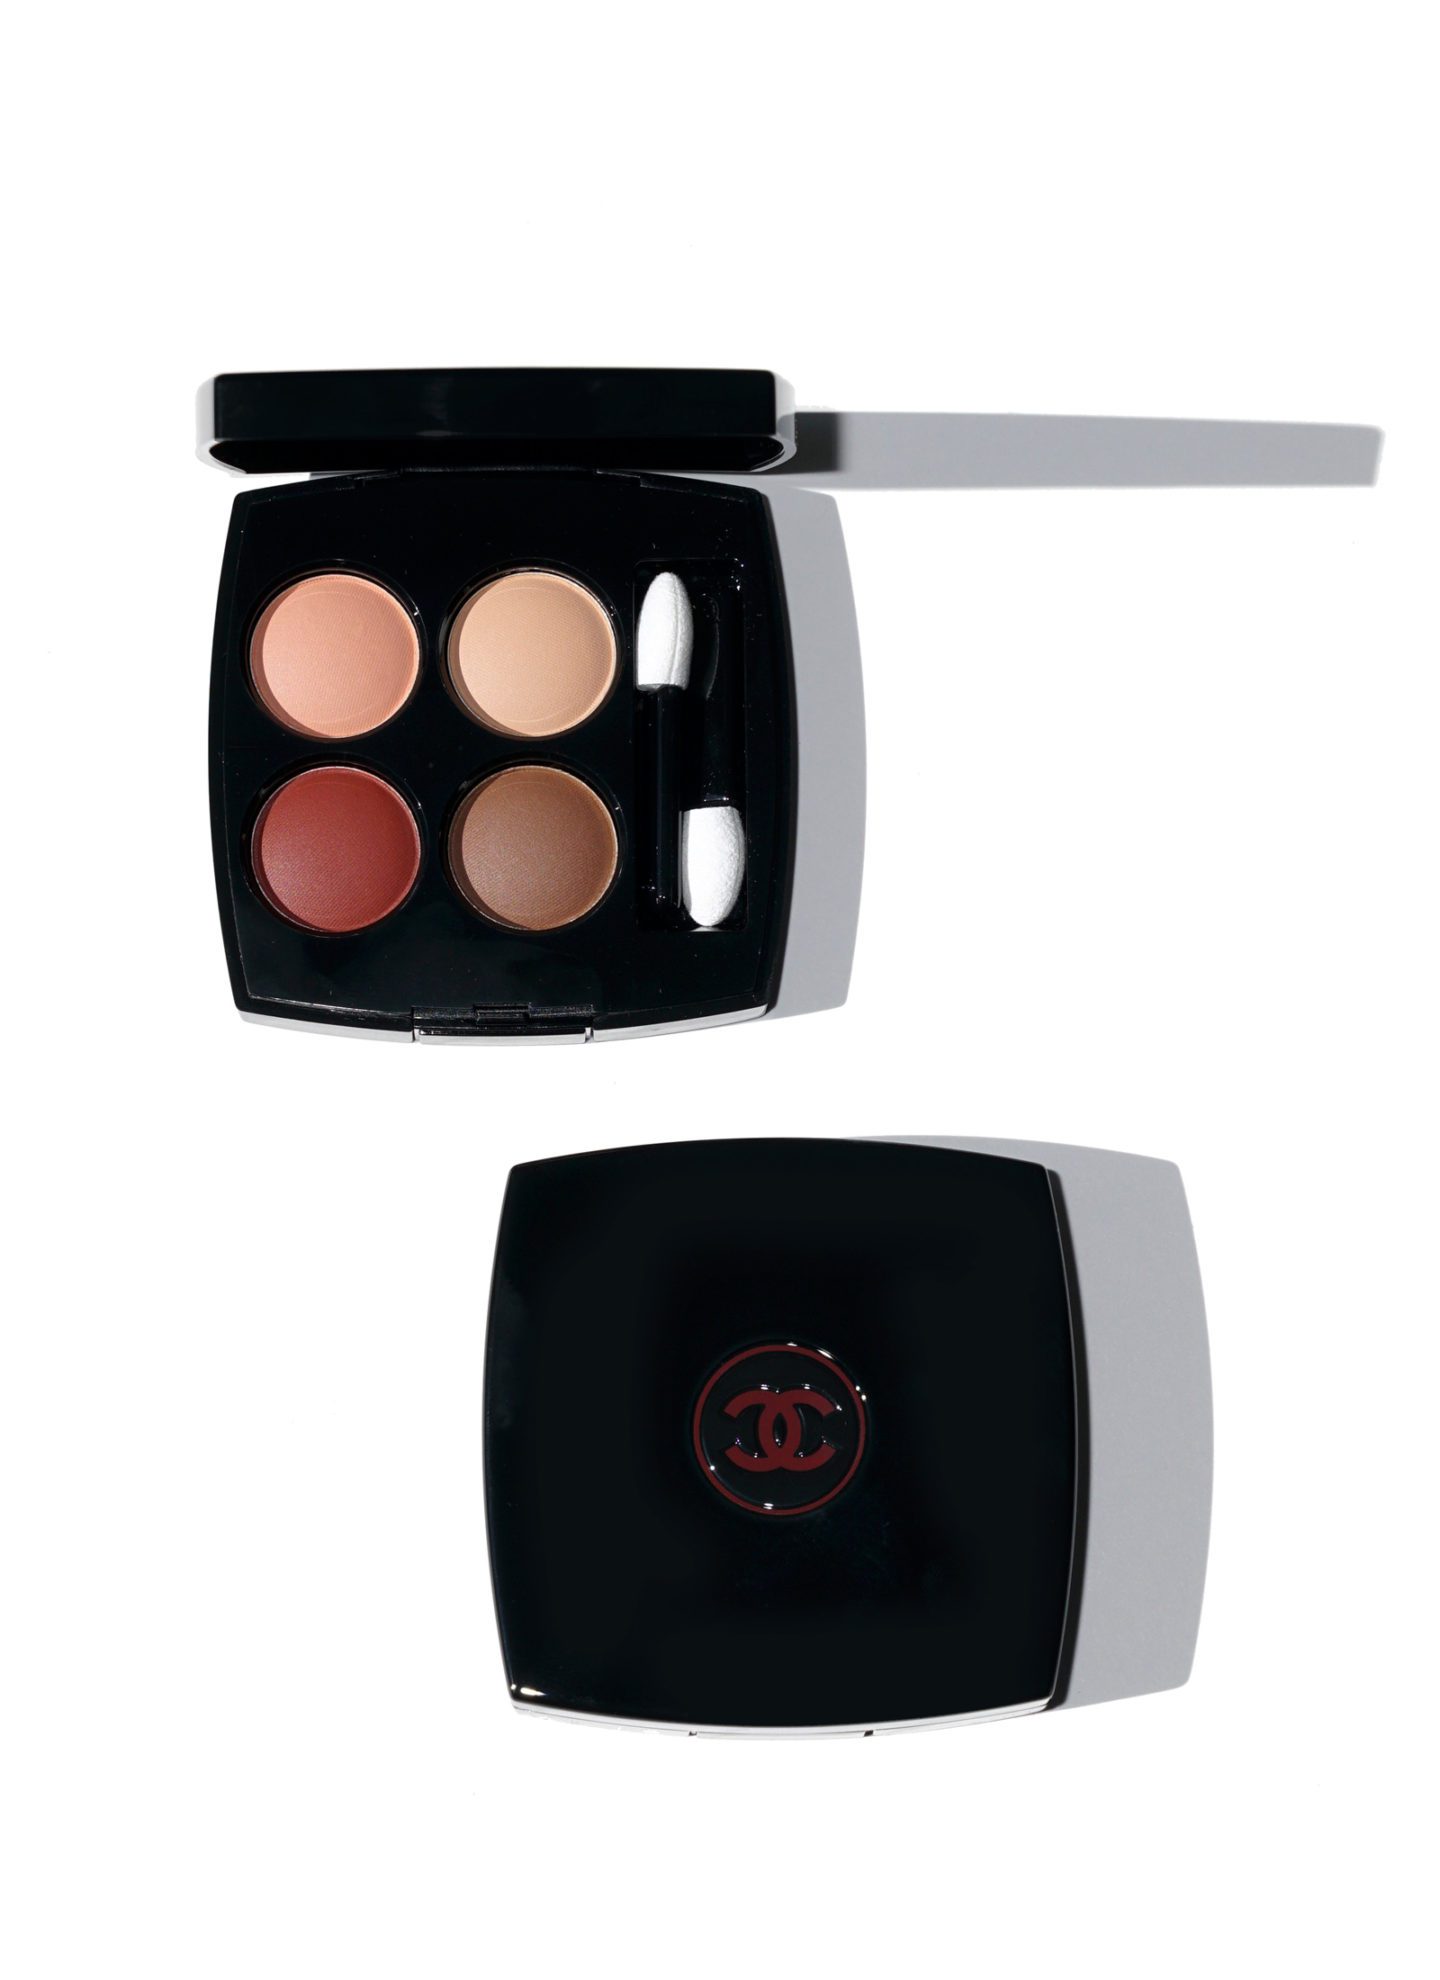 Chanel Legerete Et Experience Eyeshadow Quad - Les 4 Ombres | The Beauty Look Book